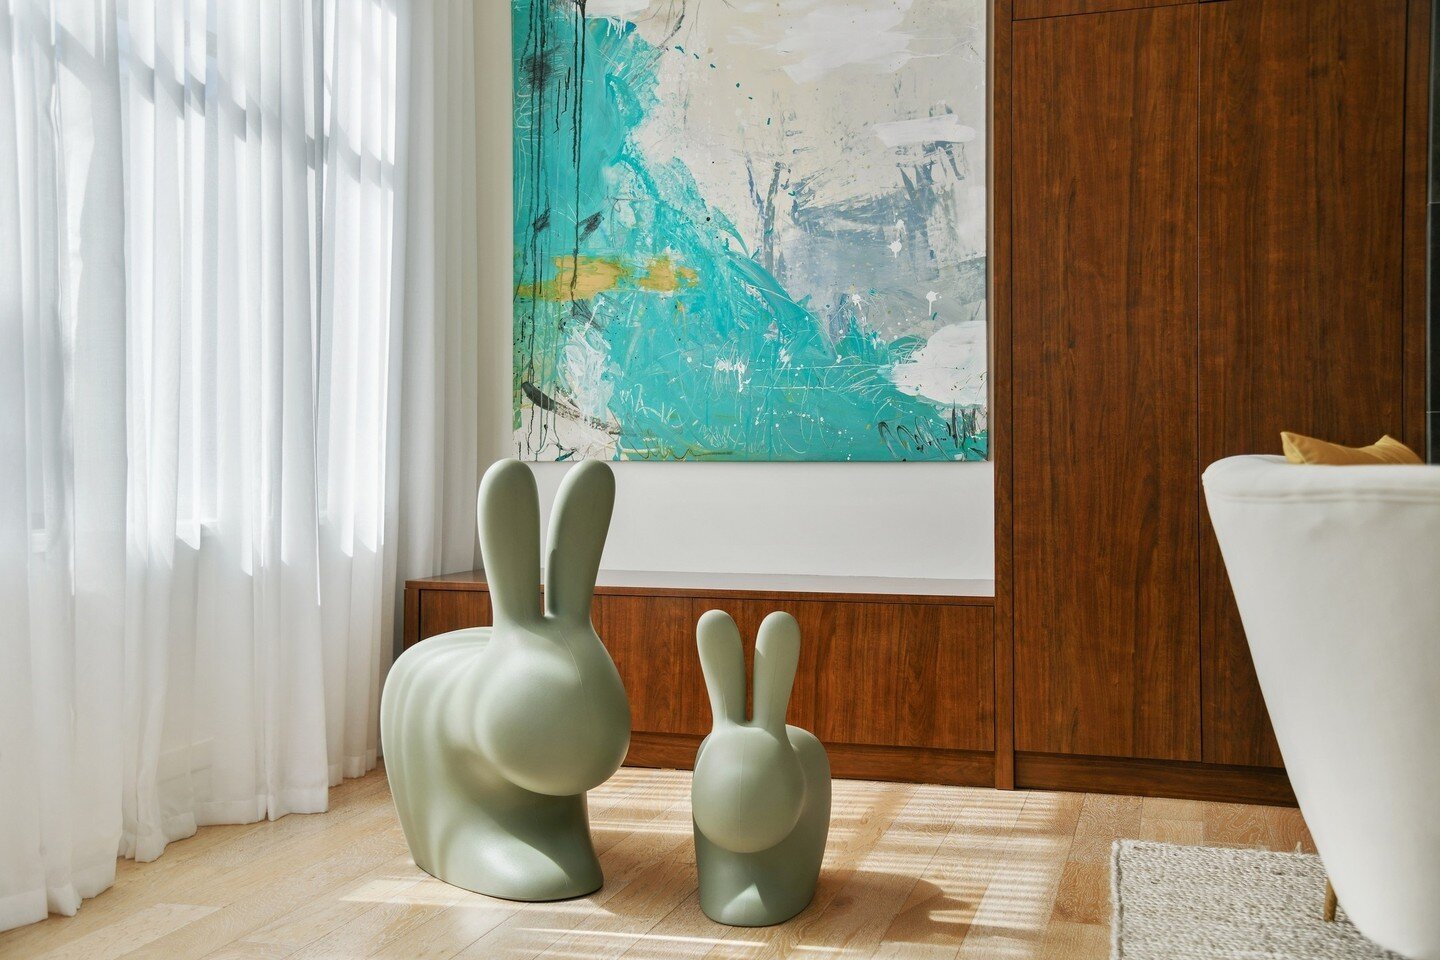 Entering Easter, we have incorporated rabbit chairs by Stefano Giovannoni for @Queeboo_official into our residential project, which brings us great delight. My design philosophy revolves around creating spaces that cater to all individuals, regardles